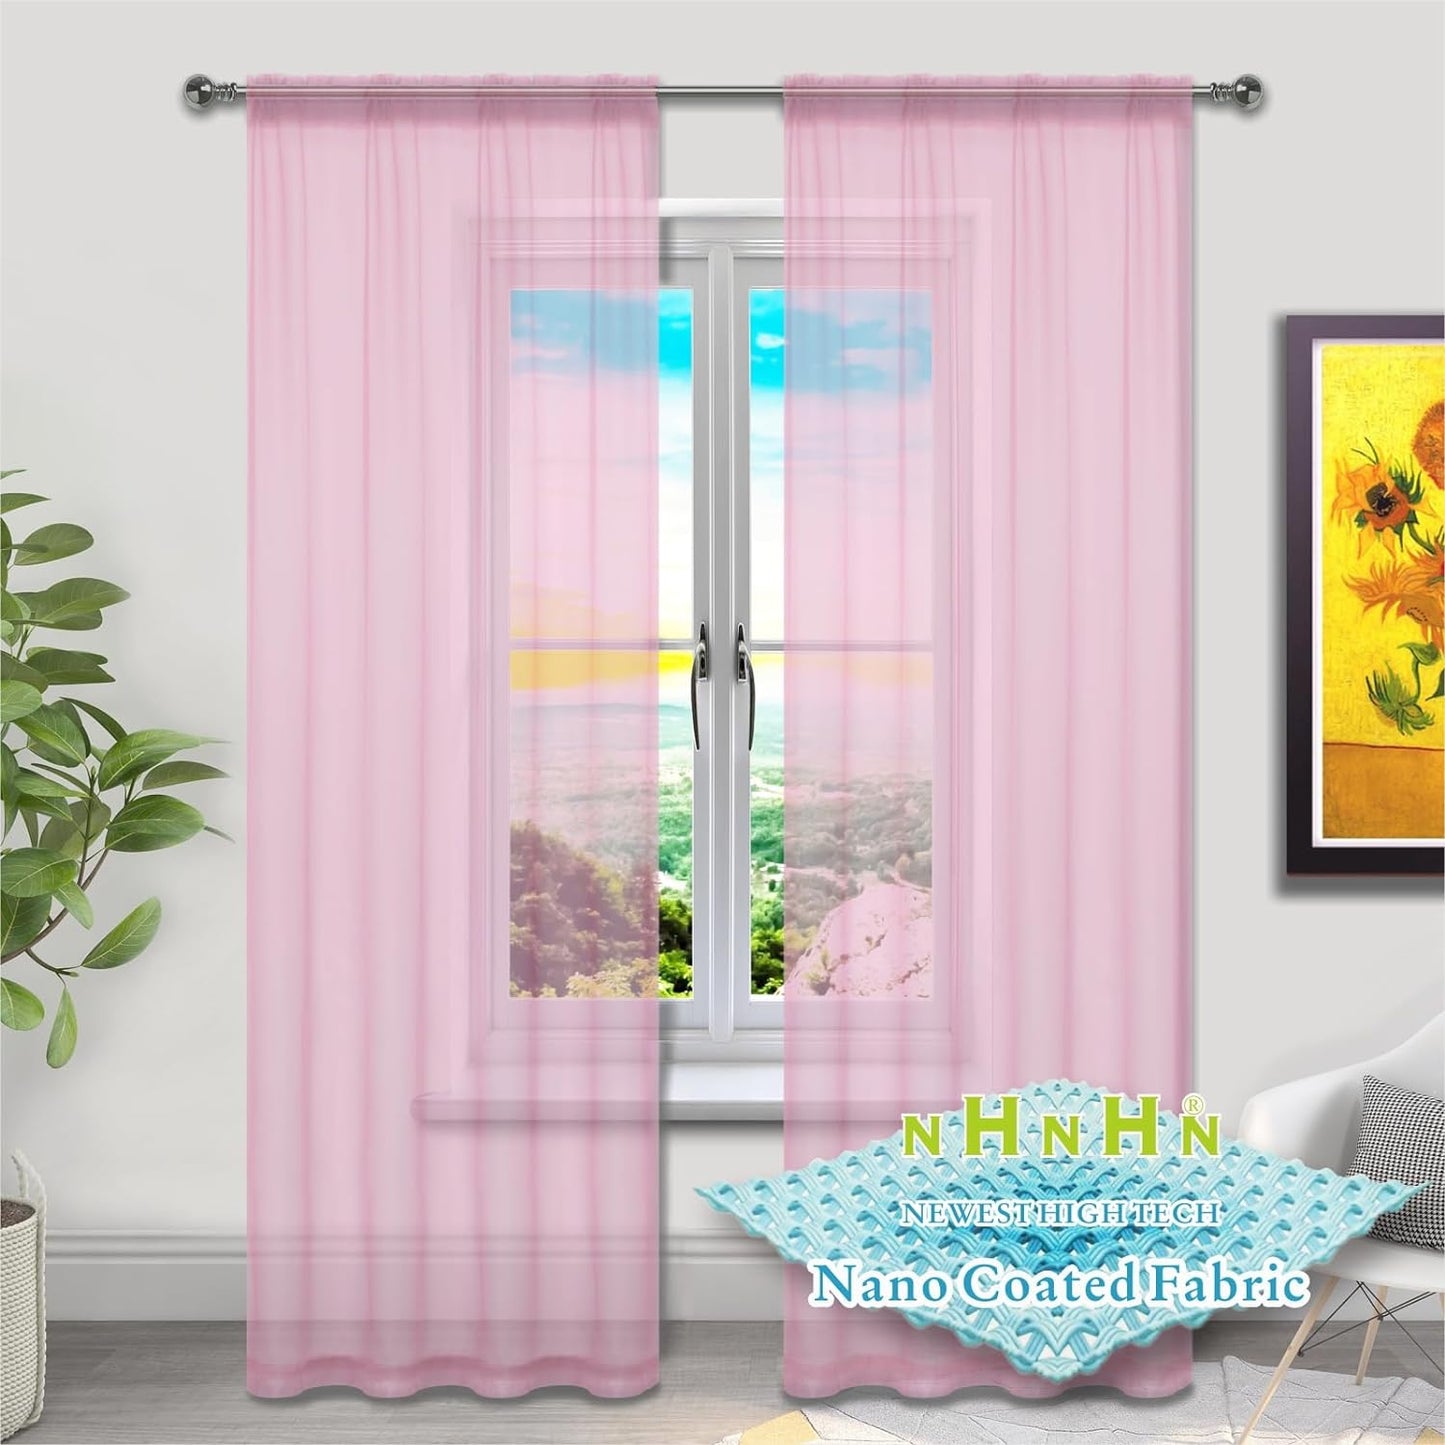 Nano Material Coated White Sheer Curtains 72 Inches Long, Rod Pocket Window Drapes Voile Sheer Curtain 2 Panels for Living Room Bedroom Kitchen (White, W52 X L72)  NHNHN Pink 52W X 72L | 2 Panels 